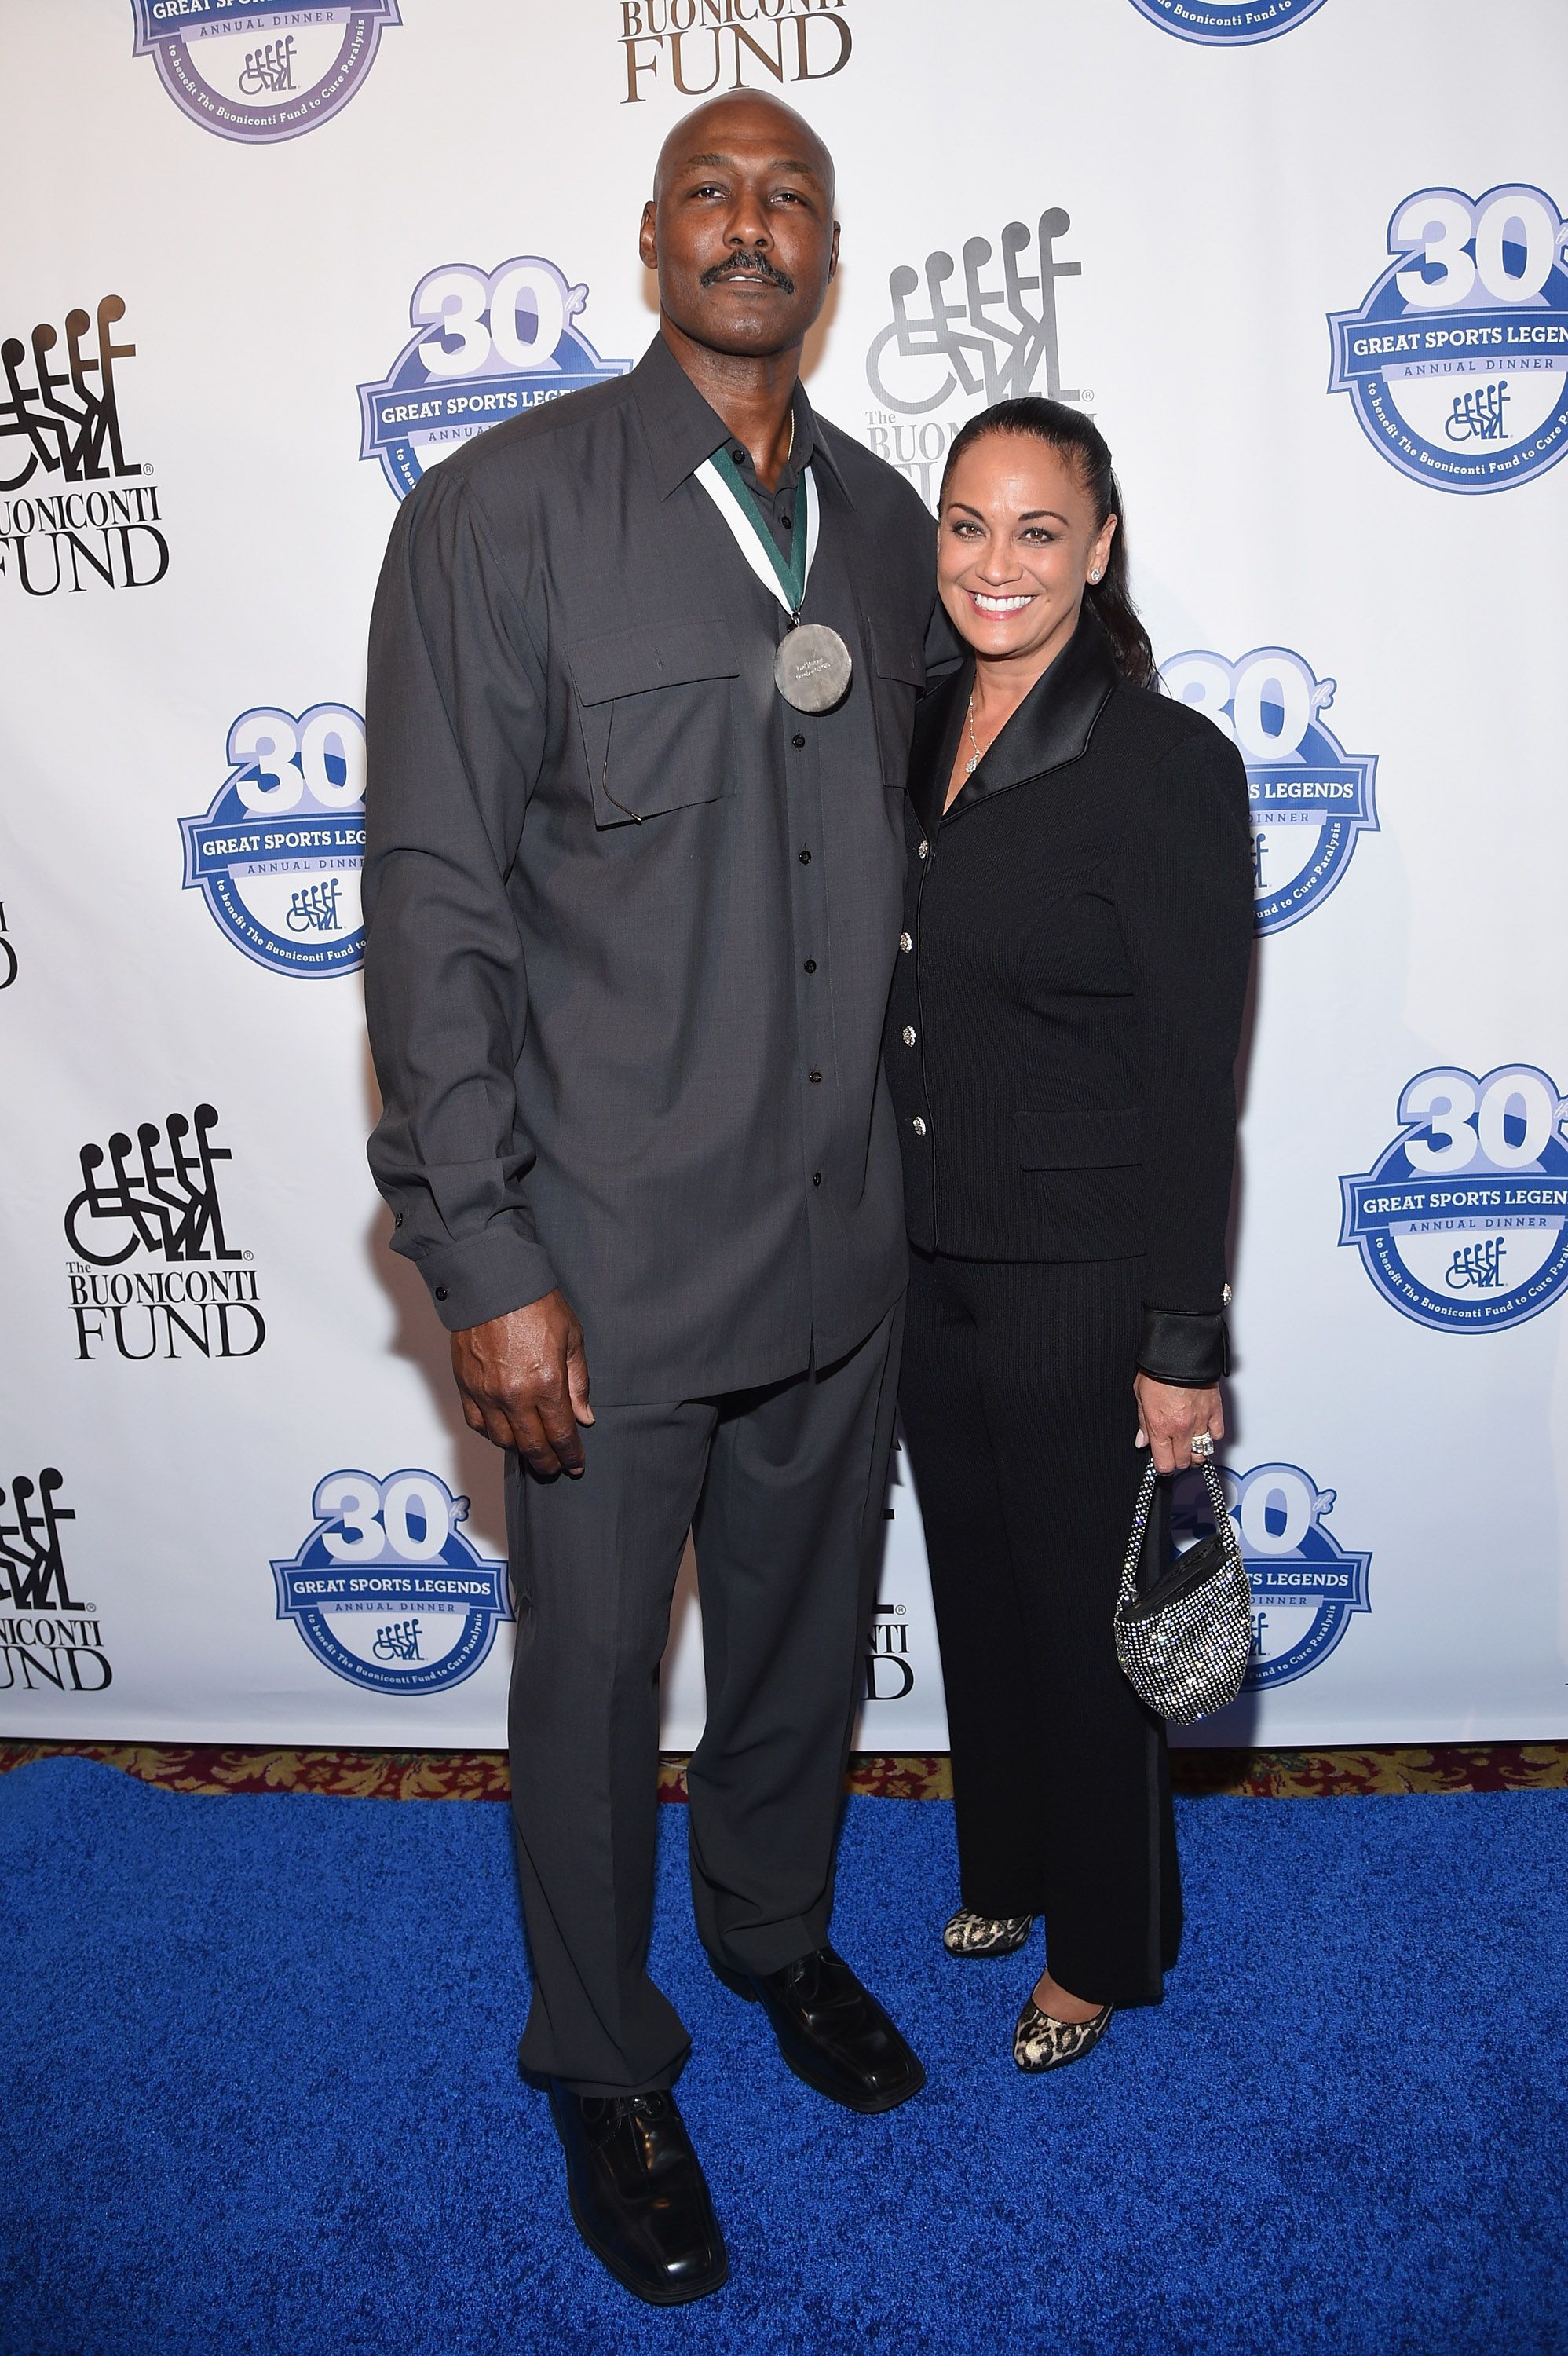 Karl Malone and his wife Kay Kinsey Malone attend the 30th Annual Great Sports Legends Dinner to benefit The Buoniconti Fund to Cure Paralysis at The Waldorf Astoria on October 6, 2015 in New York City. | Source: Getty Images